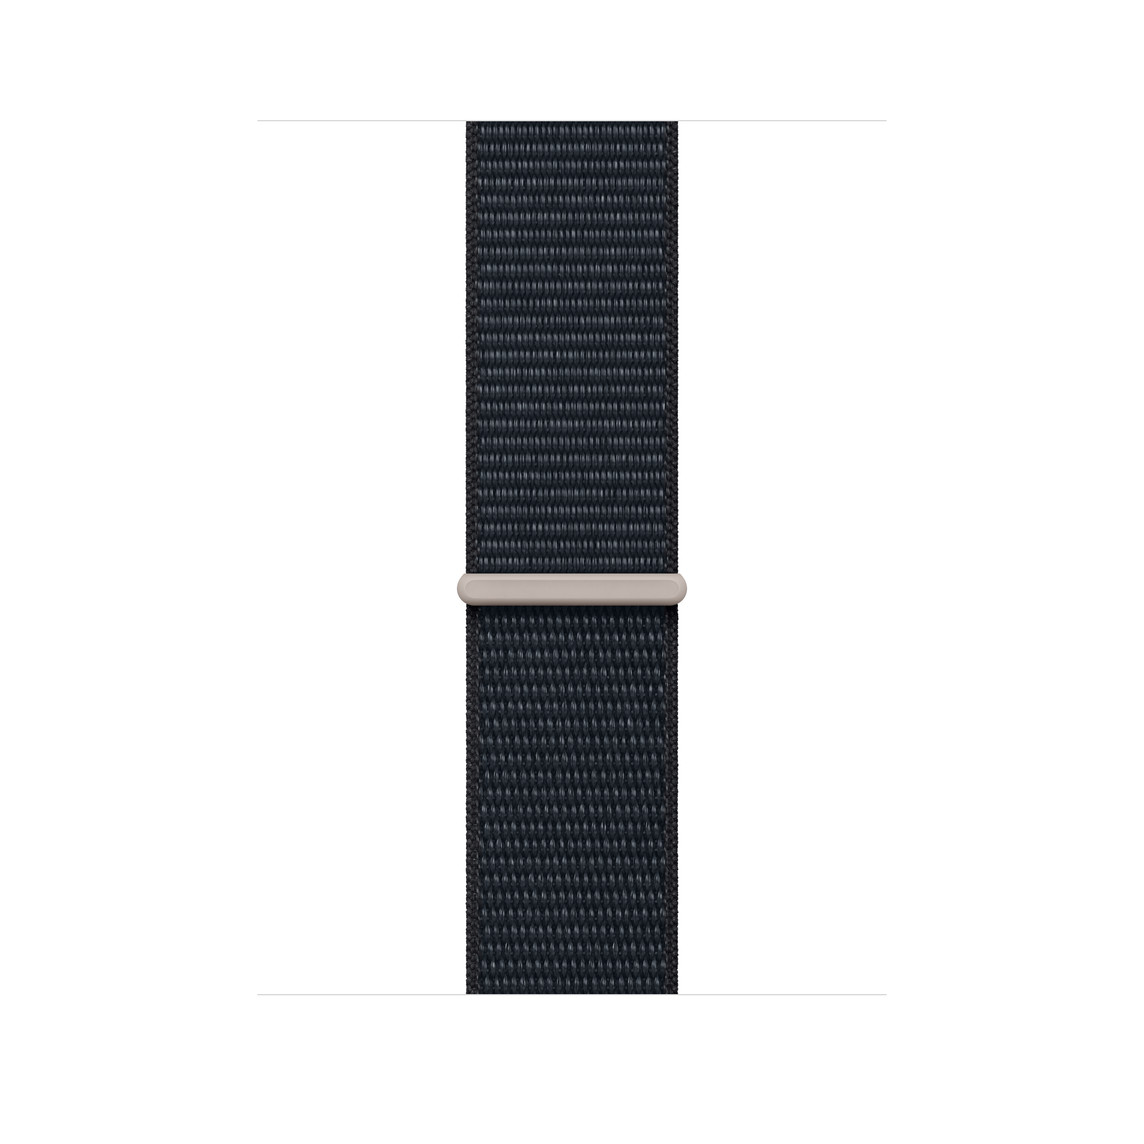 Midnight Sport Loop band, dark blue woven nylon with light blue and brown stripes, hook-and-loop fastener